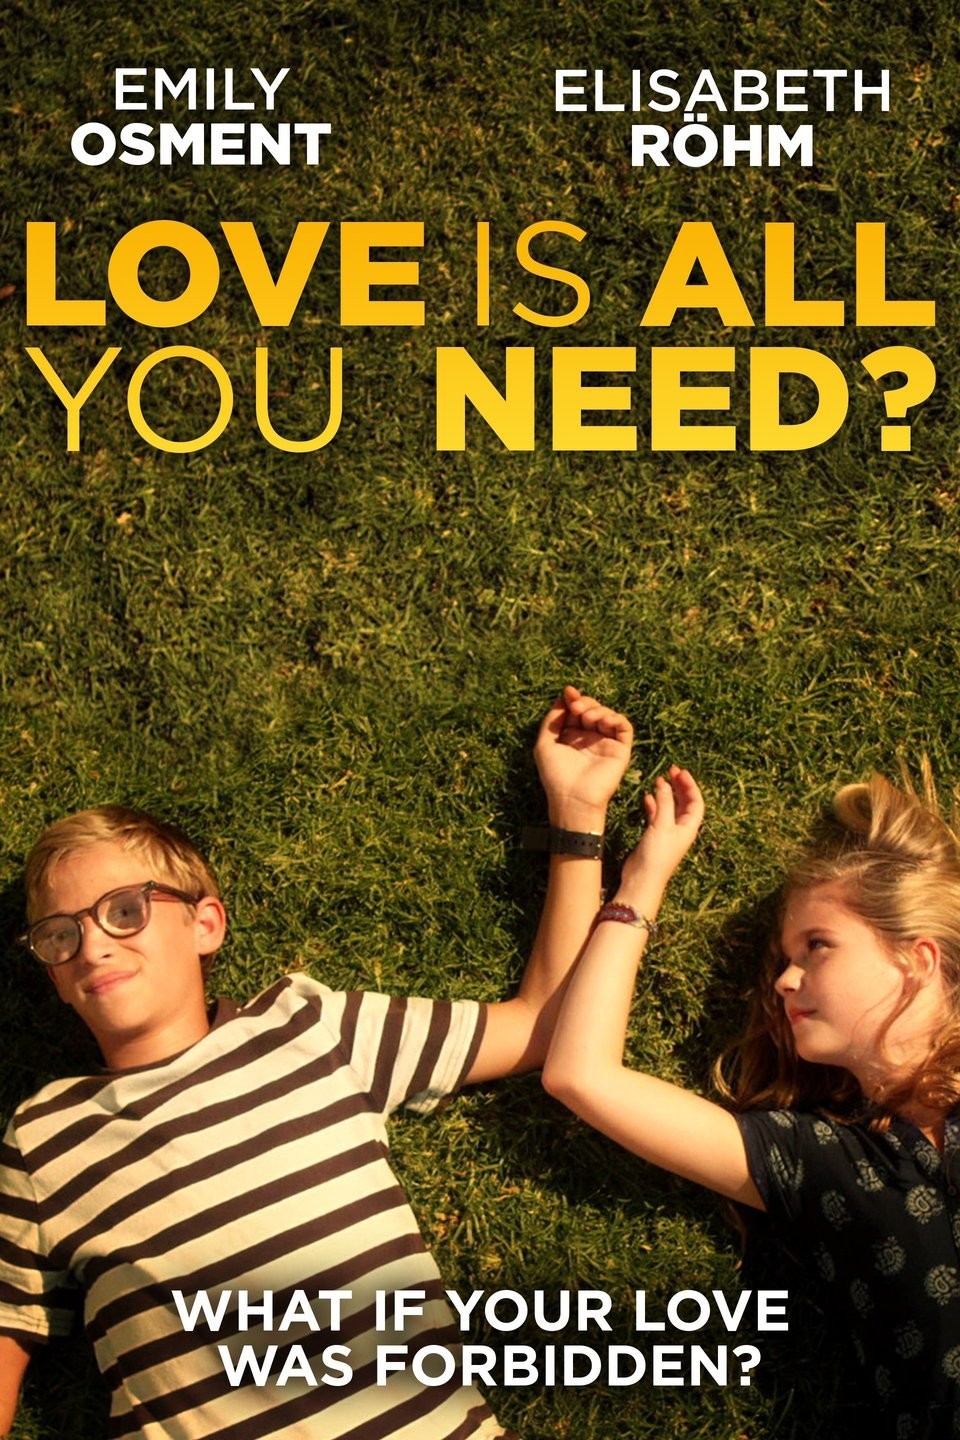 Love Is All You Need? (2016 film) - Wikipedia